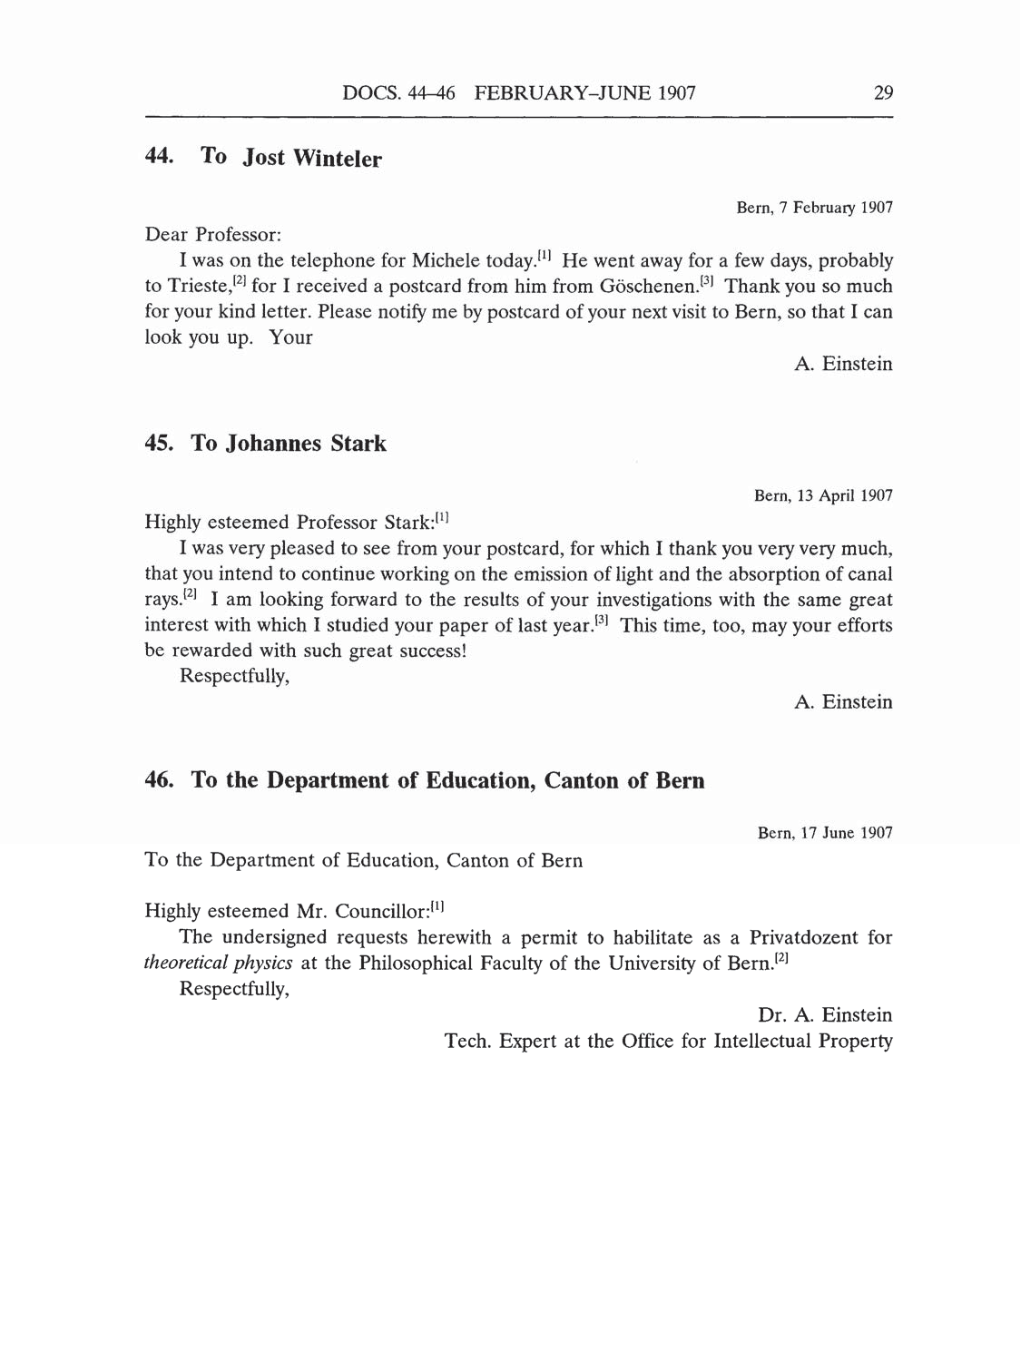 Volume 5: The Swiss Years: Correspondence, 1902-1914 (English translation supplement) page 29